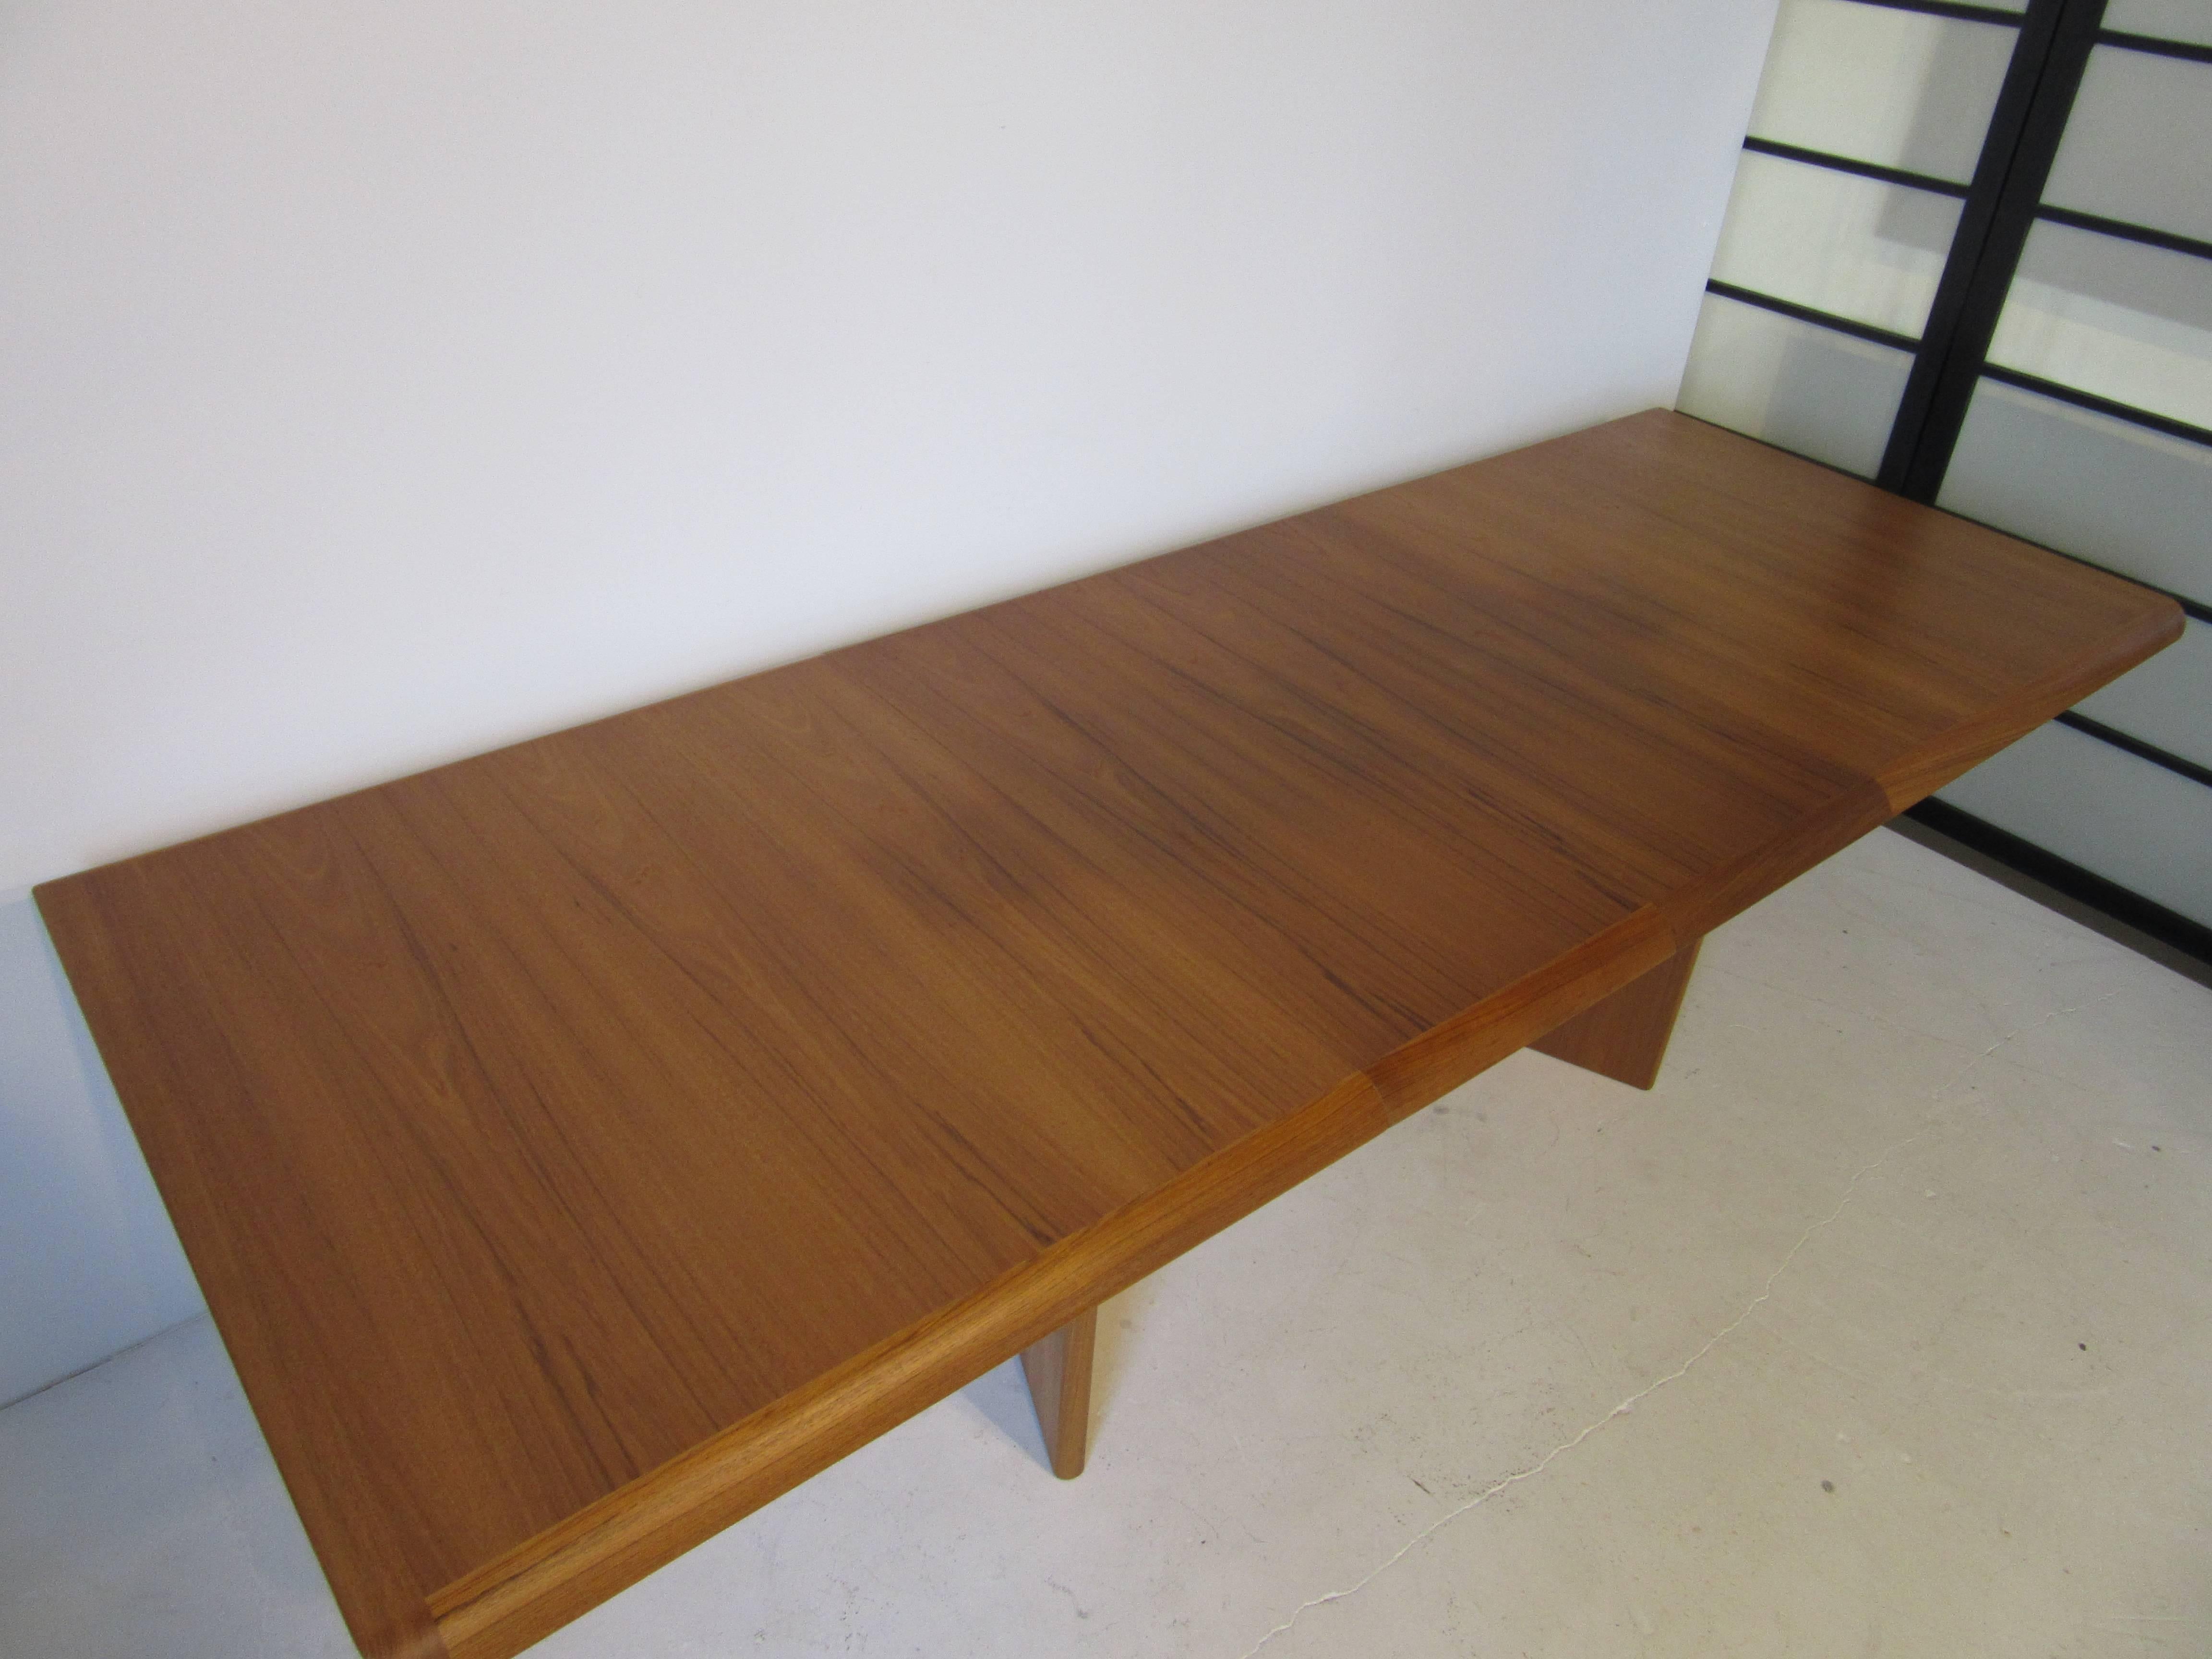 20th Century Teak Wood Danish Styled Dining or Conference Table